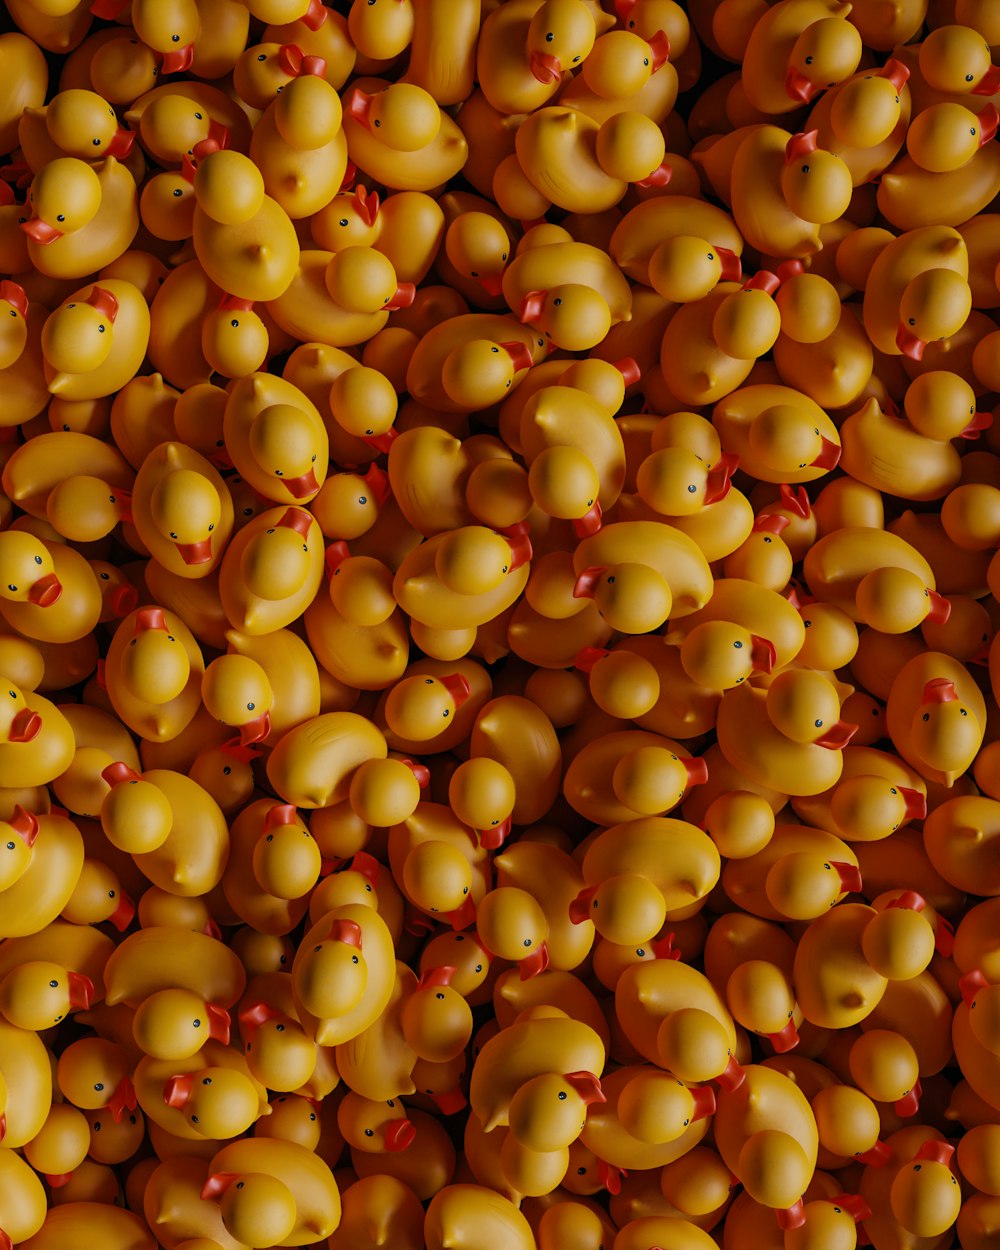 a large group of small yellow objects